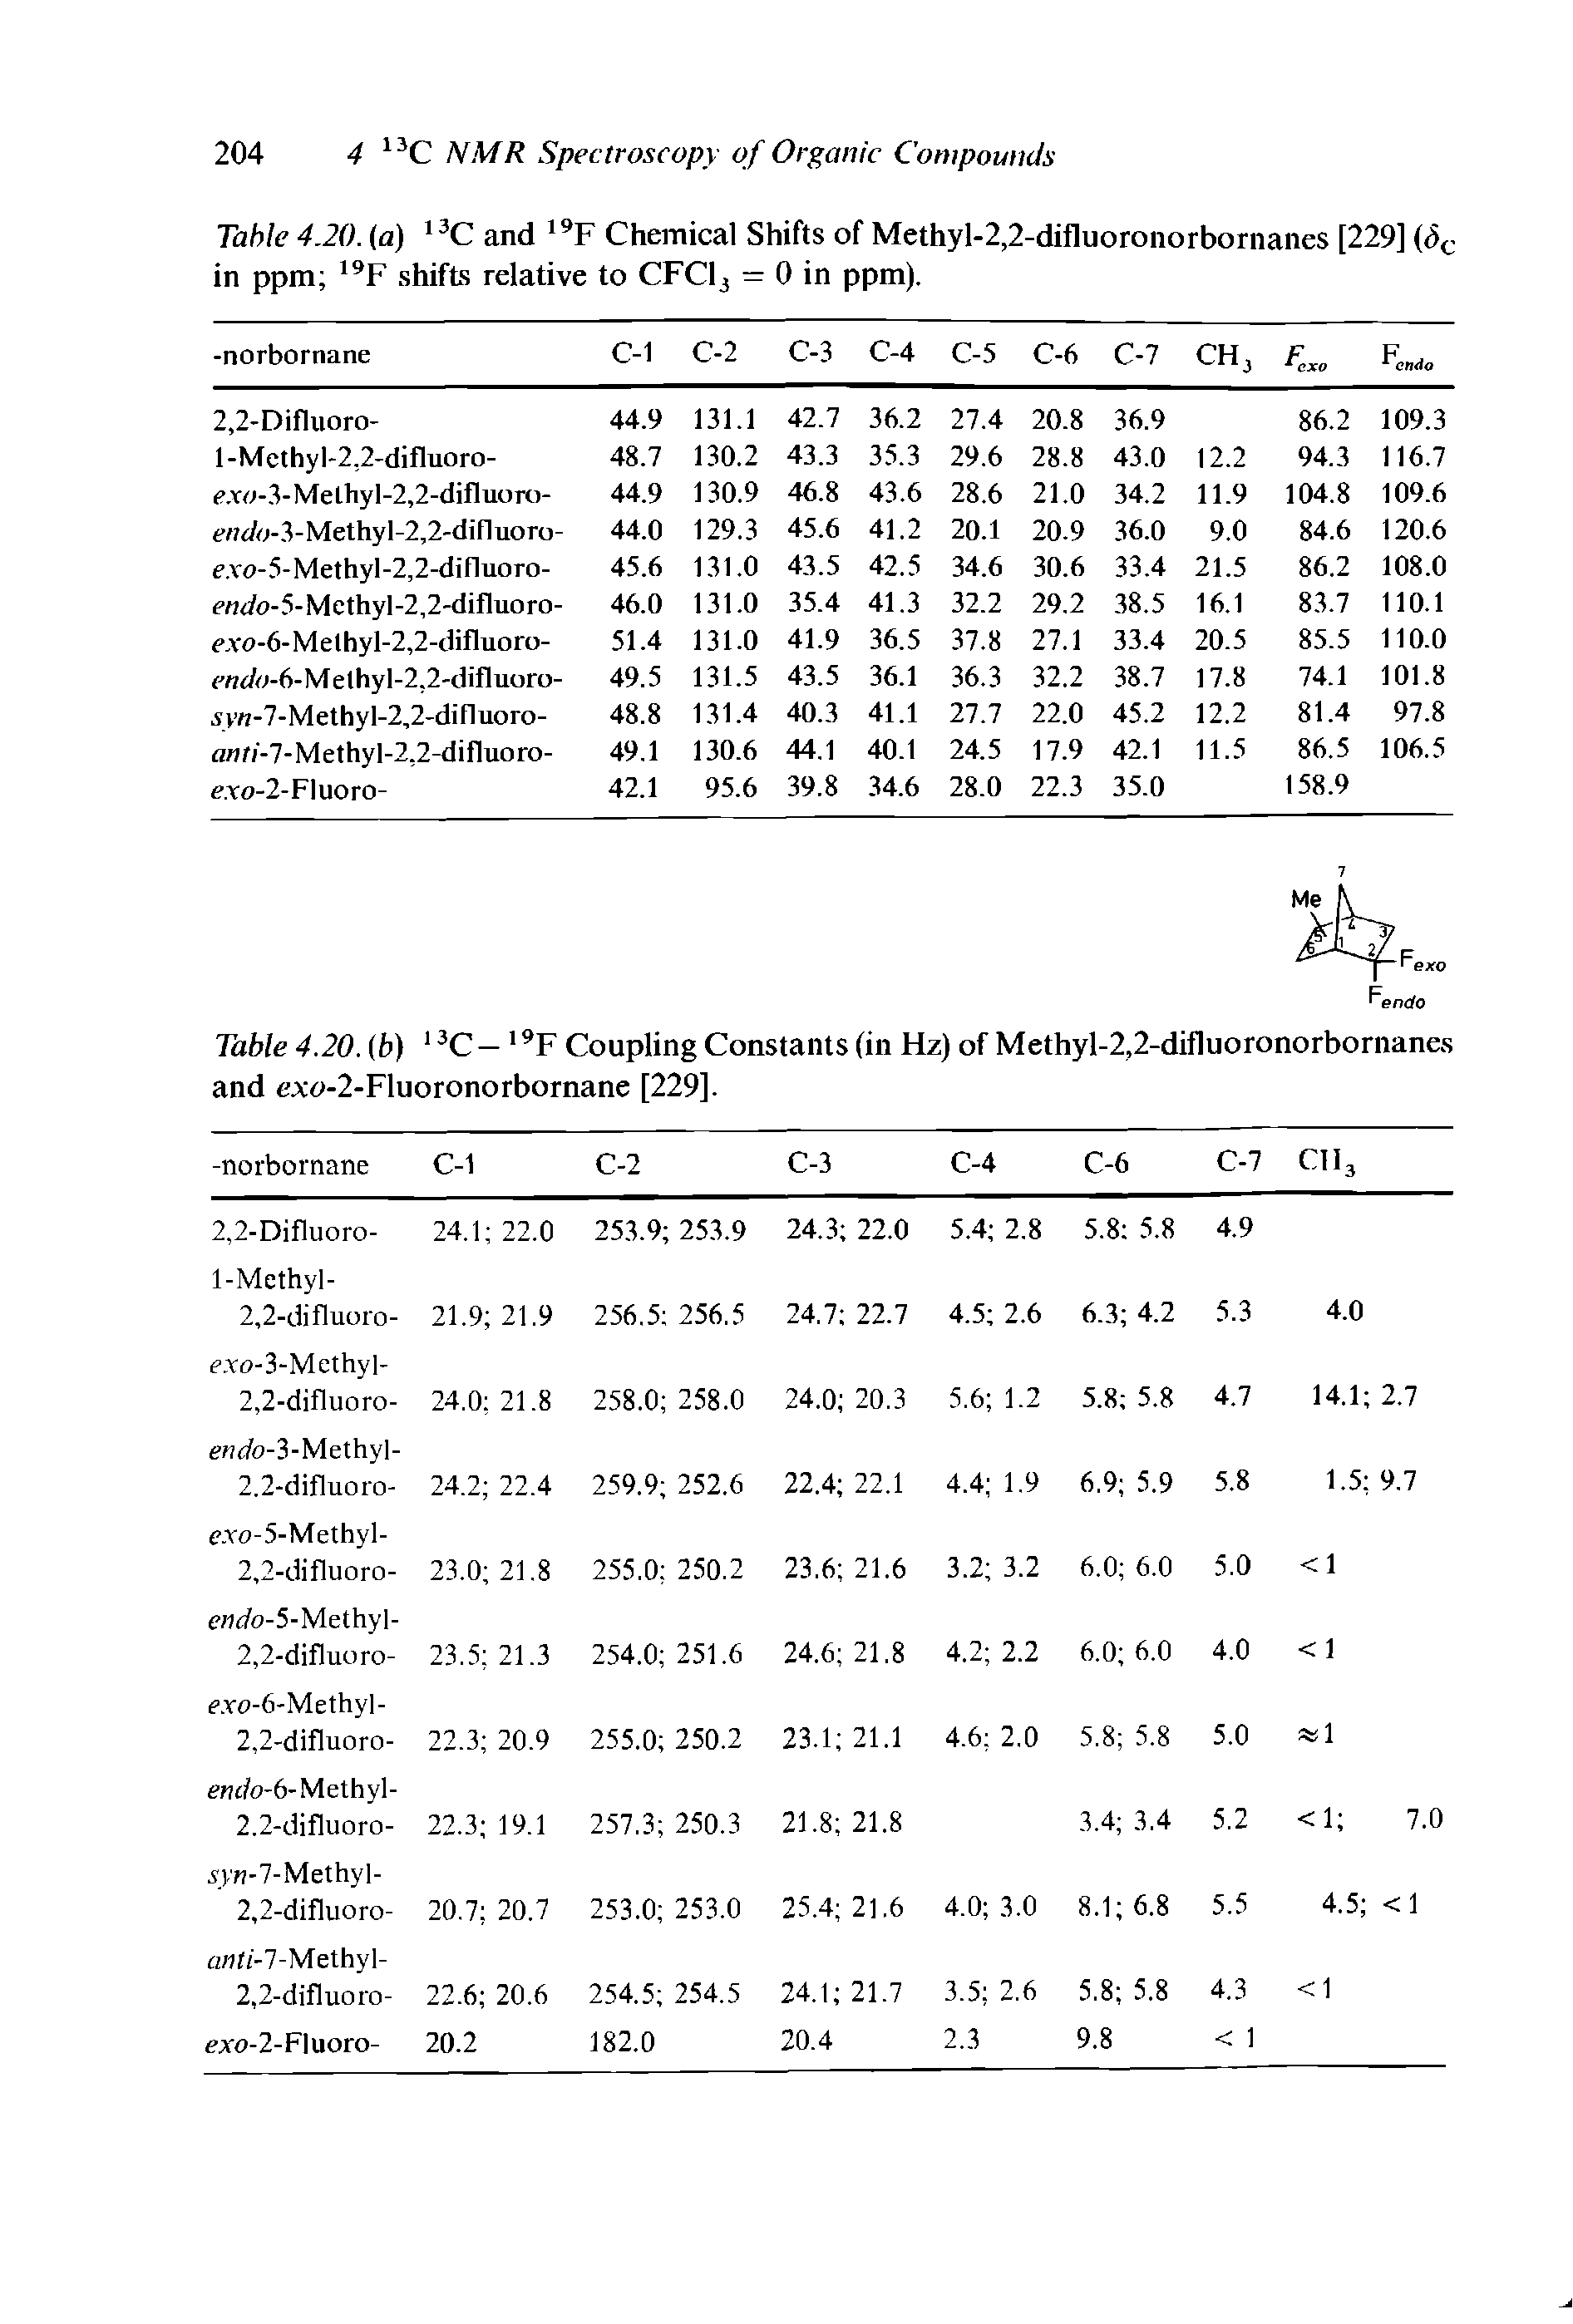 Table 4.20. (6) 13C — 19F Coupling Constants (in Hz) of Methyl-2,2-difluoronorbornanes and exo-2-Fluoronorbornane [229].